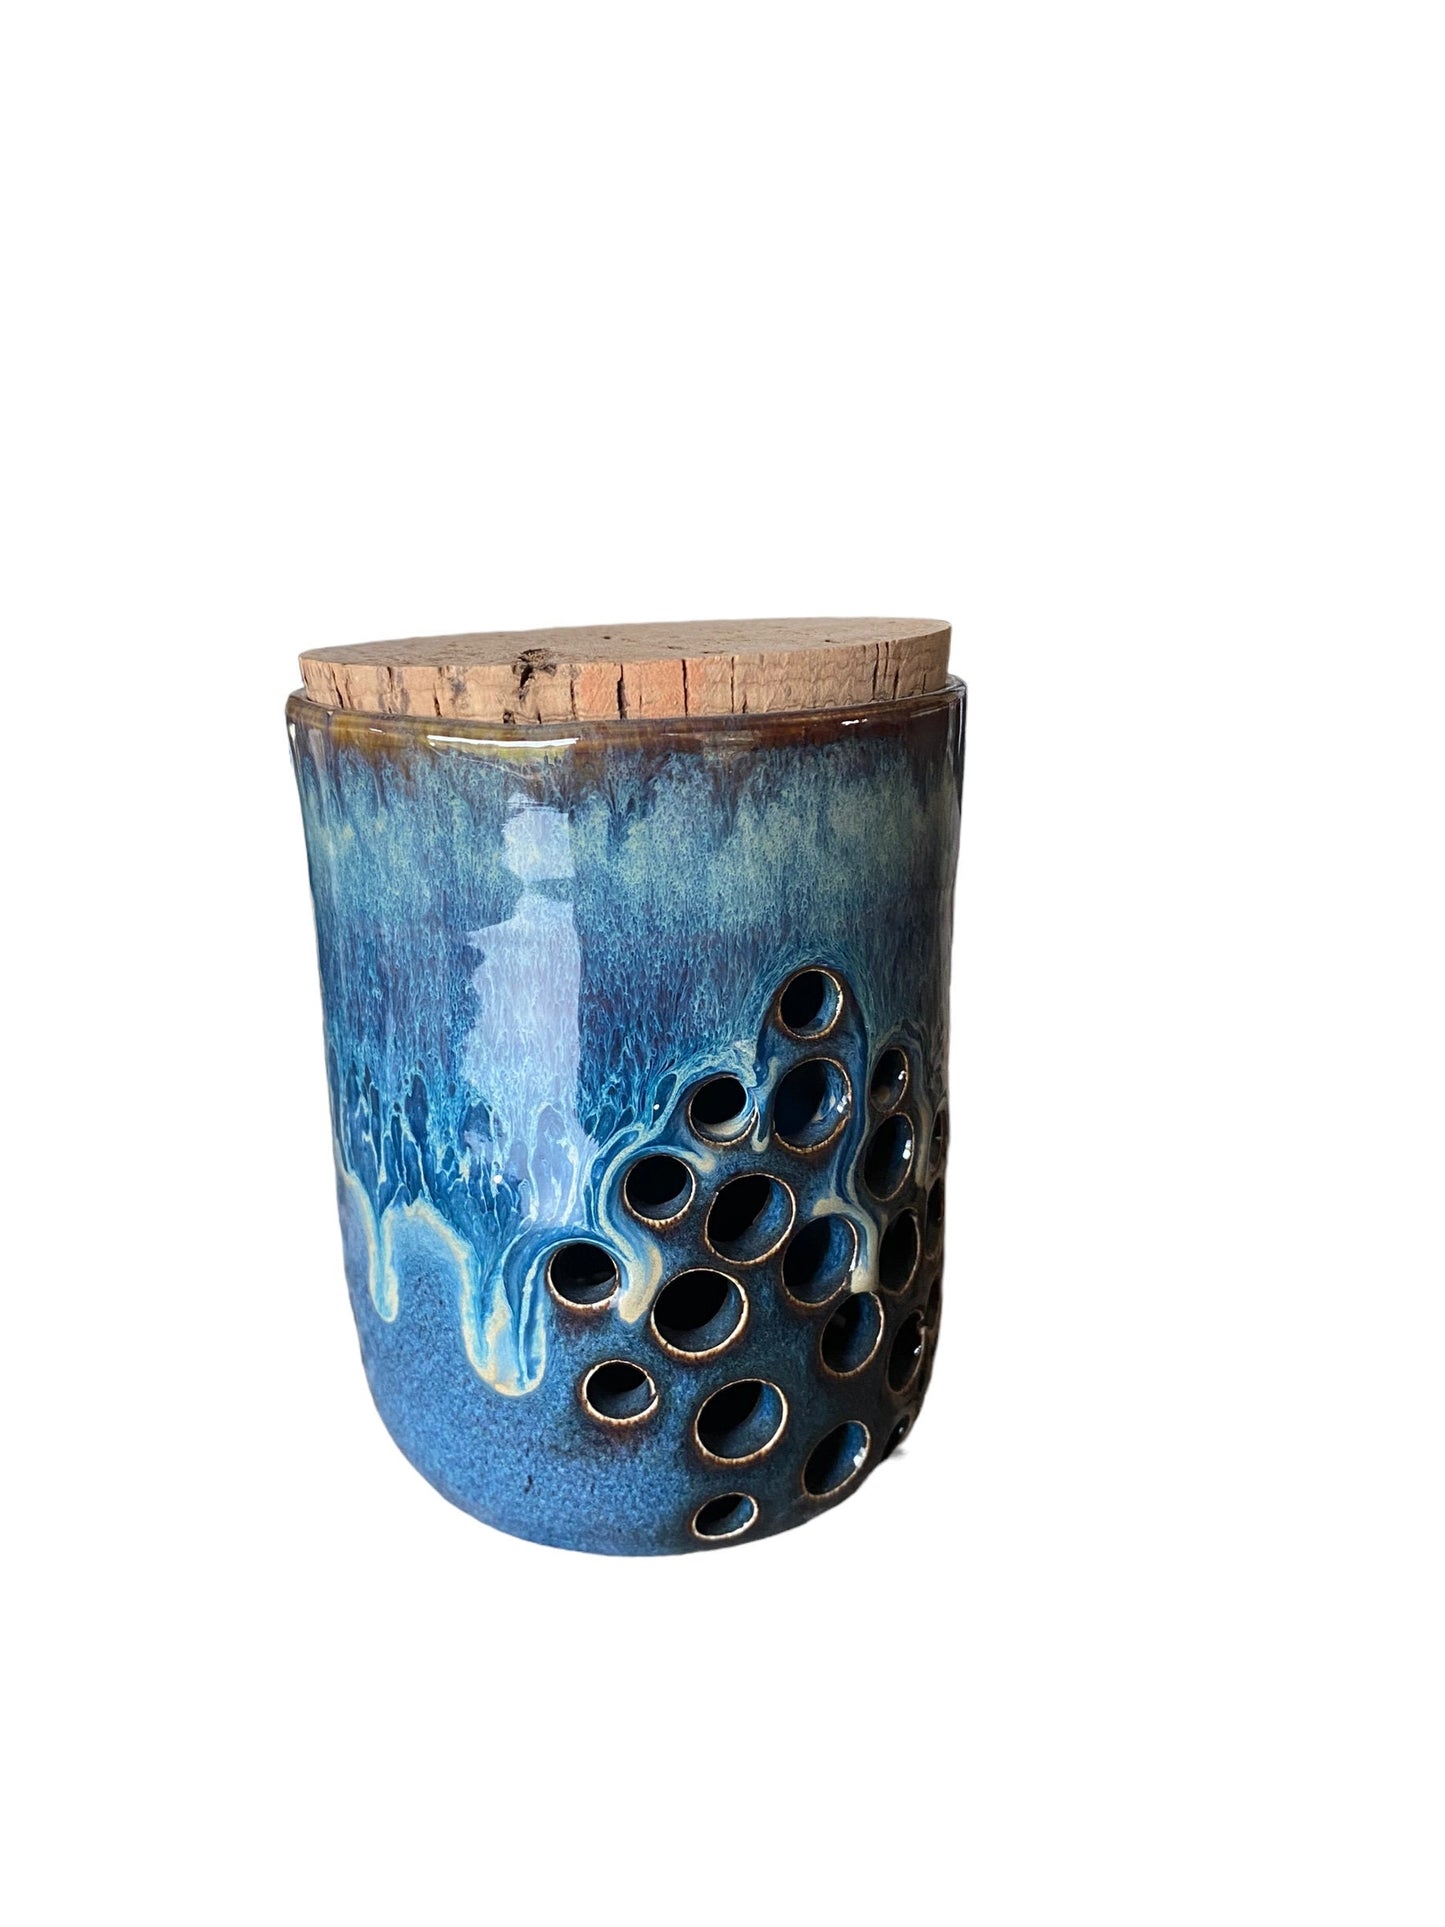 Artisan-Crafted Reactive Blue Lidded Grlic Jar: Handmade Pottery Canister for Unique Home Decor and Storage Solutions